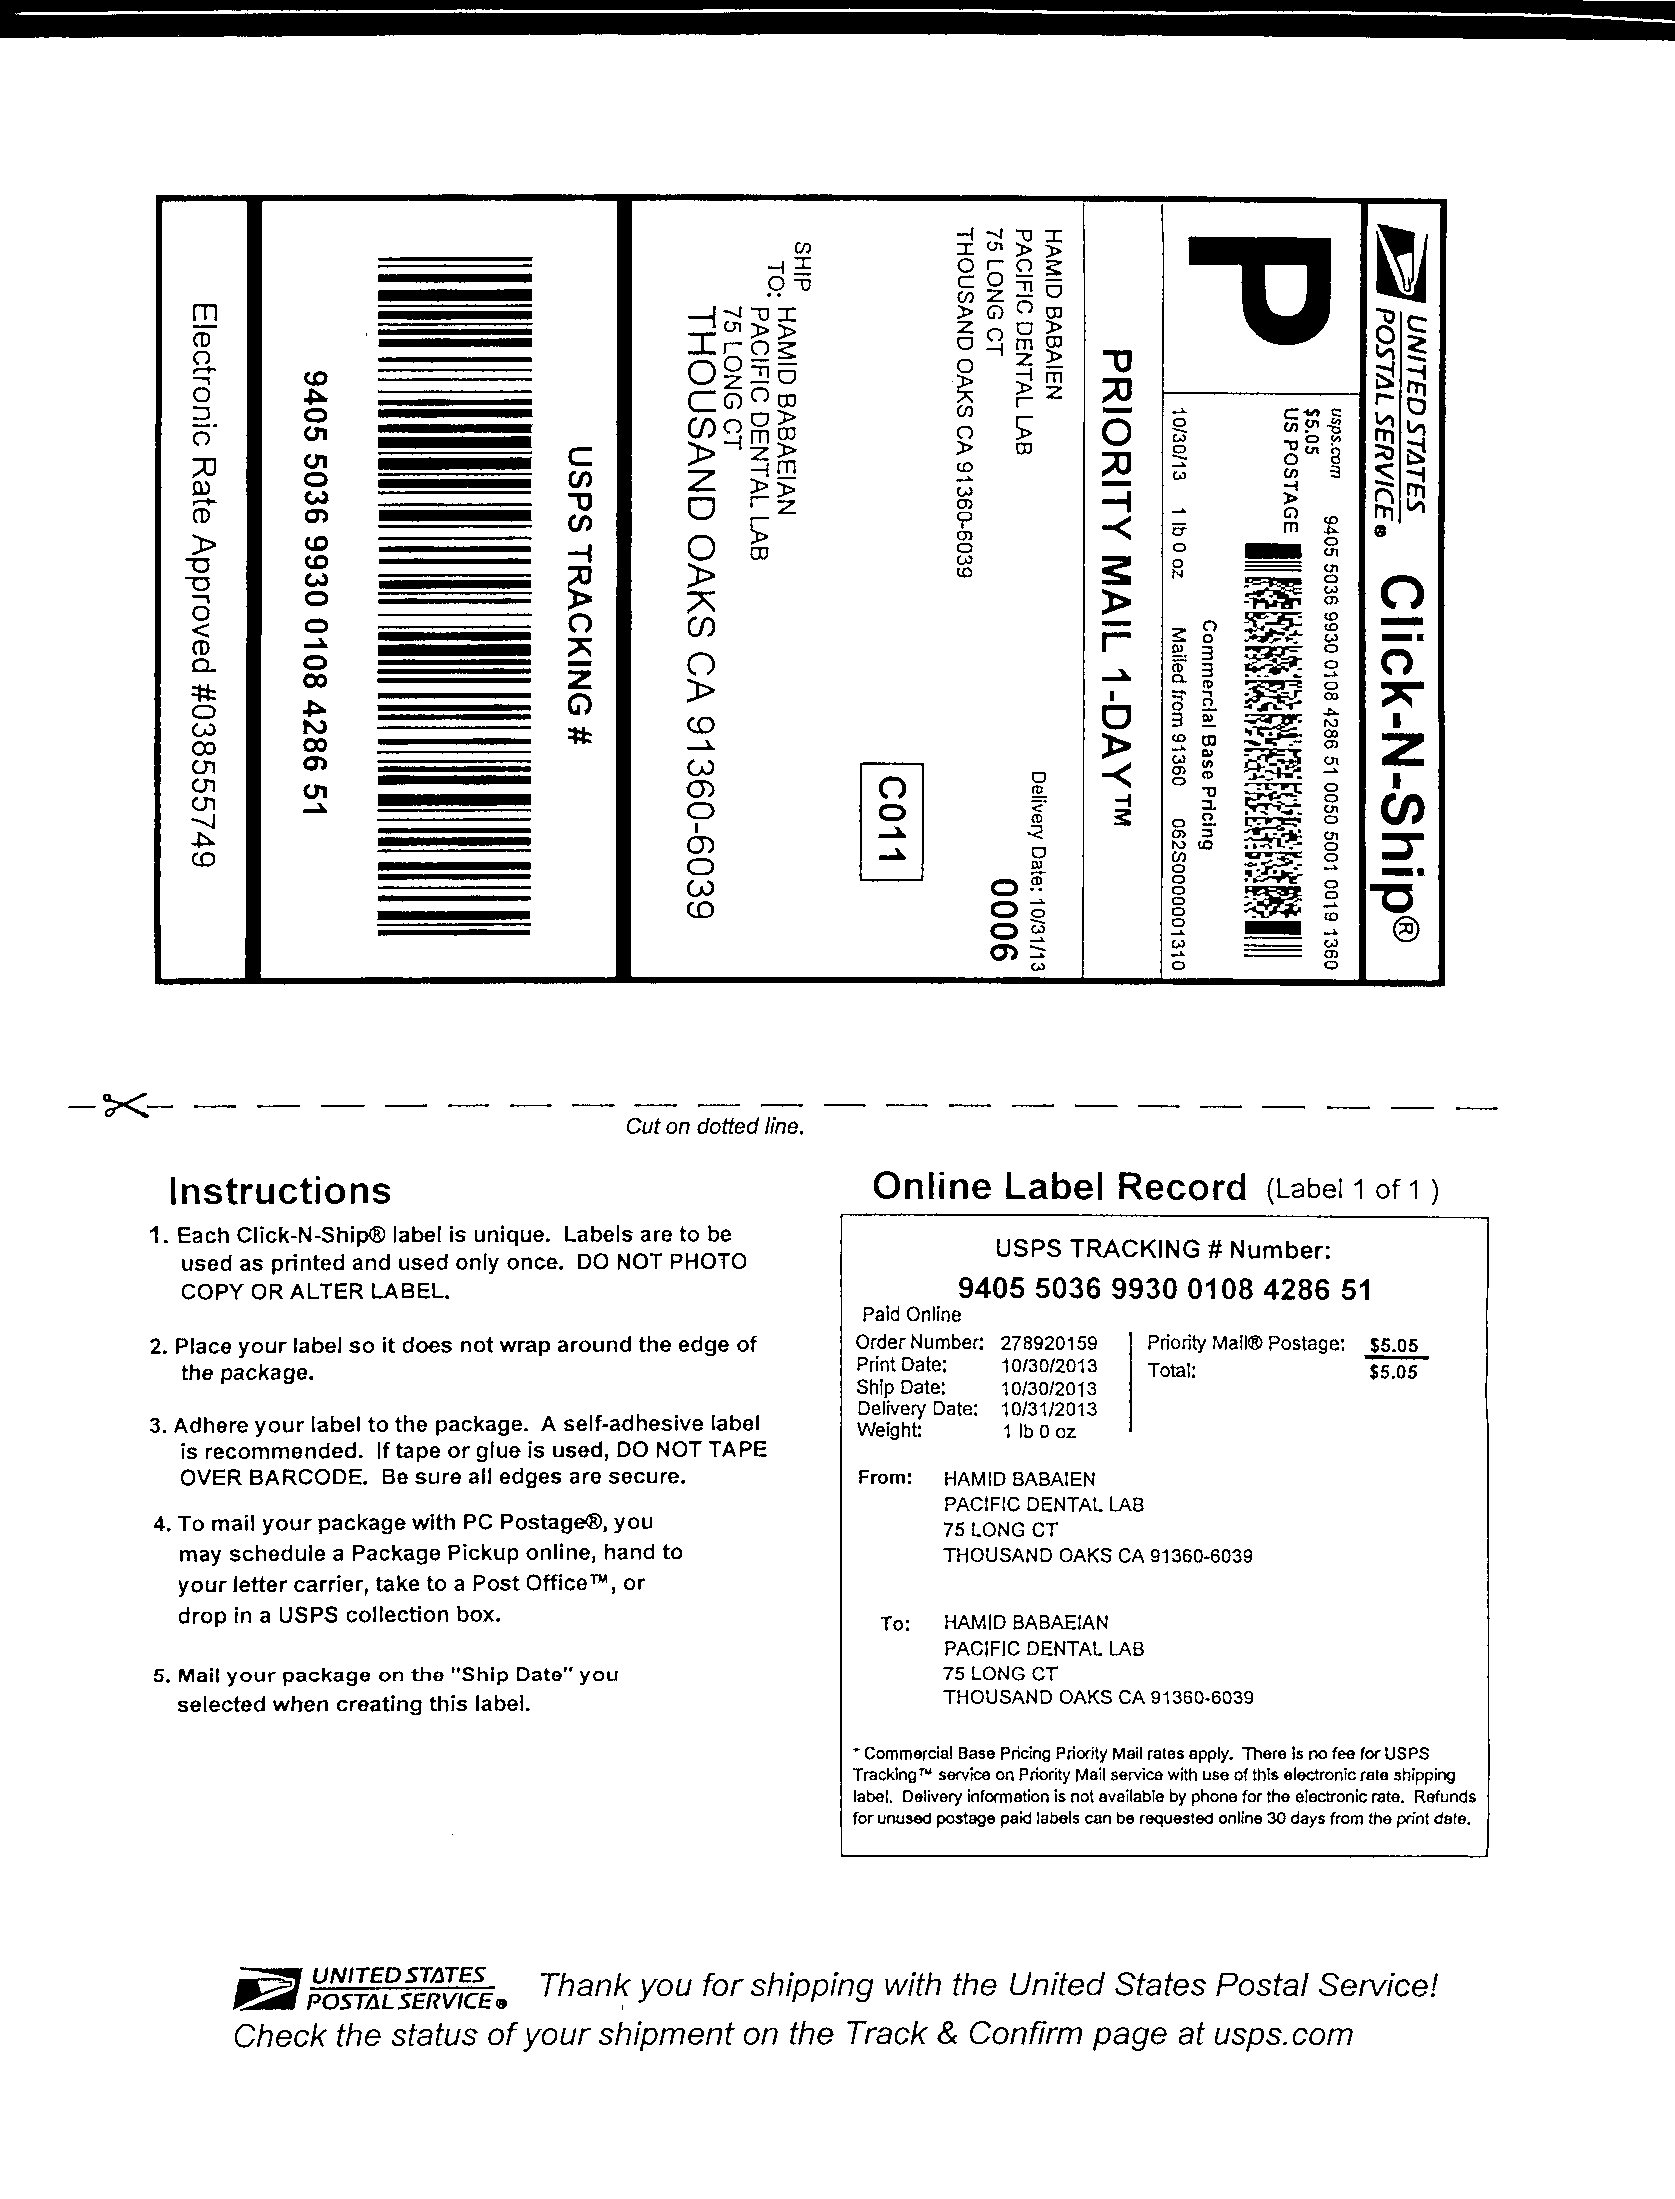 printable-usps-shipping-label-template